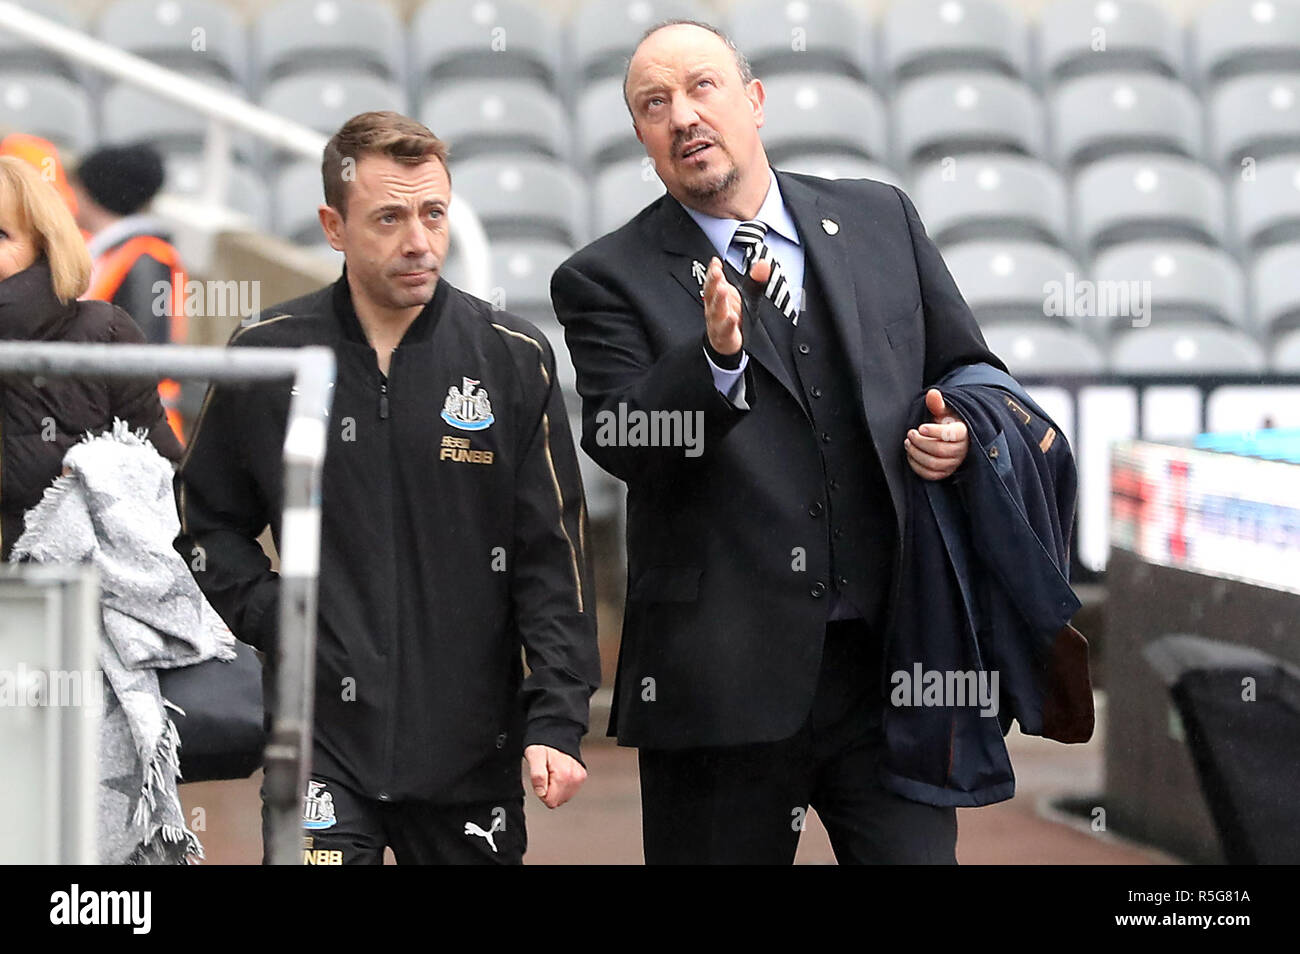 Newcastle United manager Rafael Benitez (right) arrives at the ground before the Premier League match at St James' Park, Newcastle. PRESS ASSOCIATION Photo. Picture date: Saturday December 1, 2018. See PA story SOCCER Newcastle. Photo credit should read: Owen Humphreys/PA Wire. RESTRICTIONS: No use with unauthorised audio, video, data, fixture lists, club/league logos or 'live' services. Online in-match use limited to 120 images, no video emulation. No use in betting, games or single club/league/player publications. Stock Photo